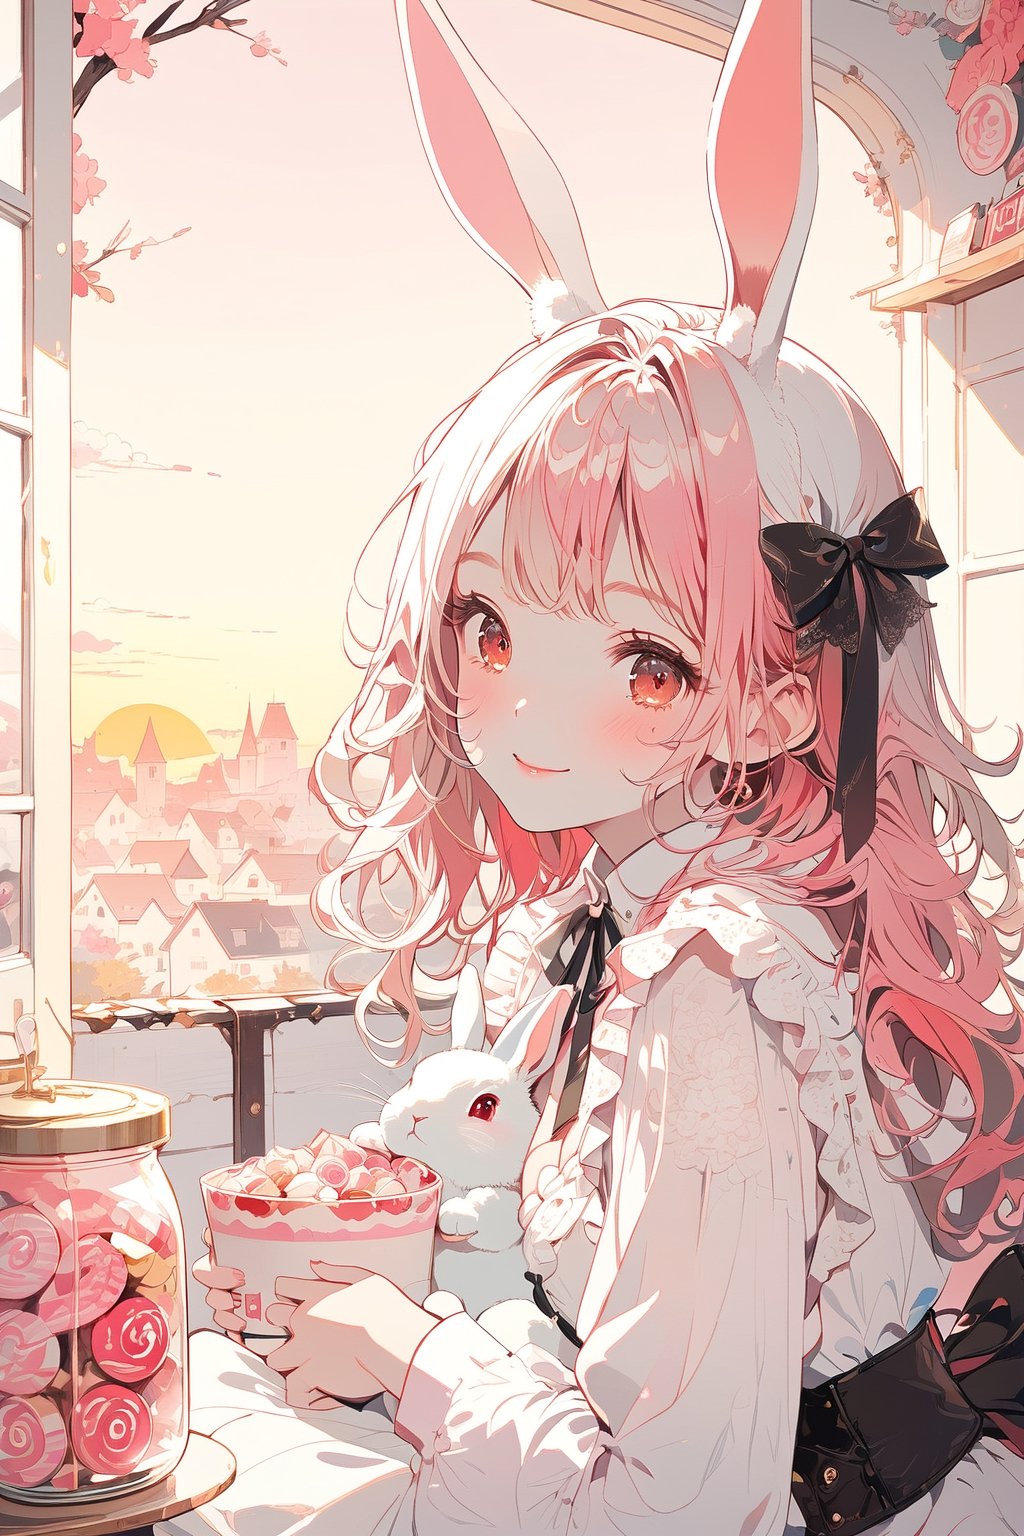 //quality, (masterpiece:1.4), (detailed), ((,best quality,)),//, cloes-up portrait,1girl,solo, rabbit_girl,//, (white rabbit_ears:1.3), (rabbit_tail:1.2),(pink hair:1.3),long_hair,curly_hair,hair_ribbons,ribbons,beautiful detailed eyes, (red eyes),breasts,//,fashion,//,blush,:), smile,//, hugging_rabbit,//, scenery, rabbits,candies,candy shop, window,pink tone,sunset, (straight-on:1.3),//,emo, cute 